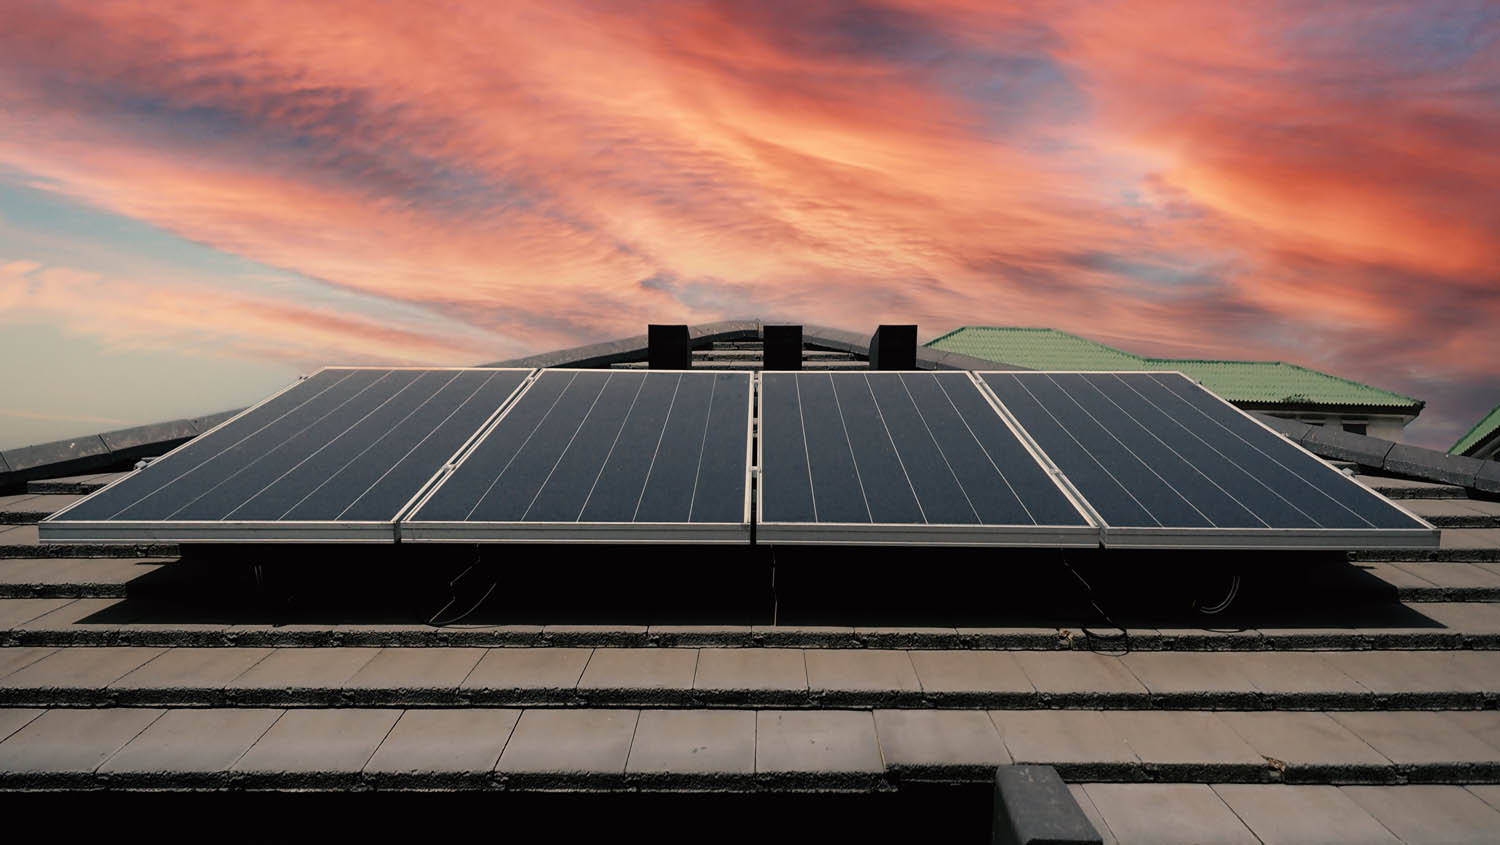 Solar roof power plant on the roof of a residential building with sunrise behind.